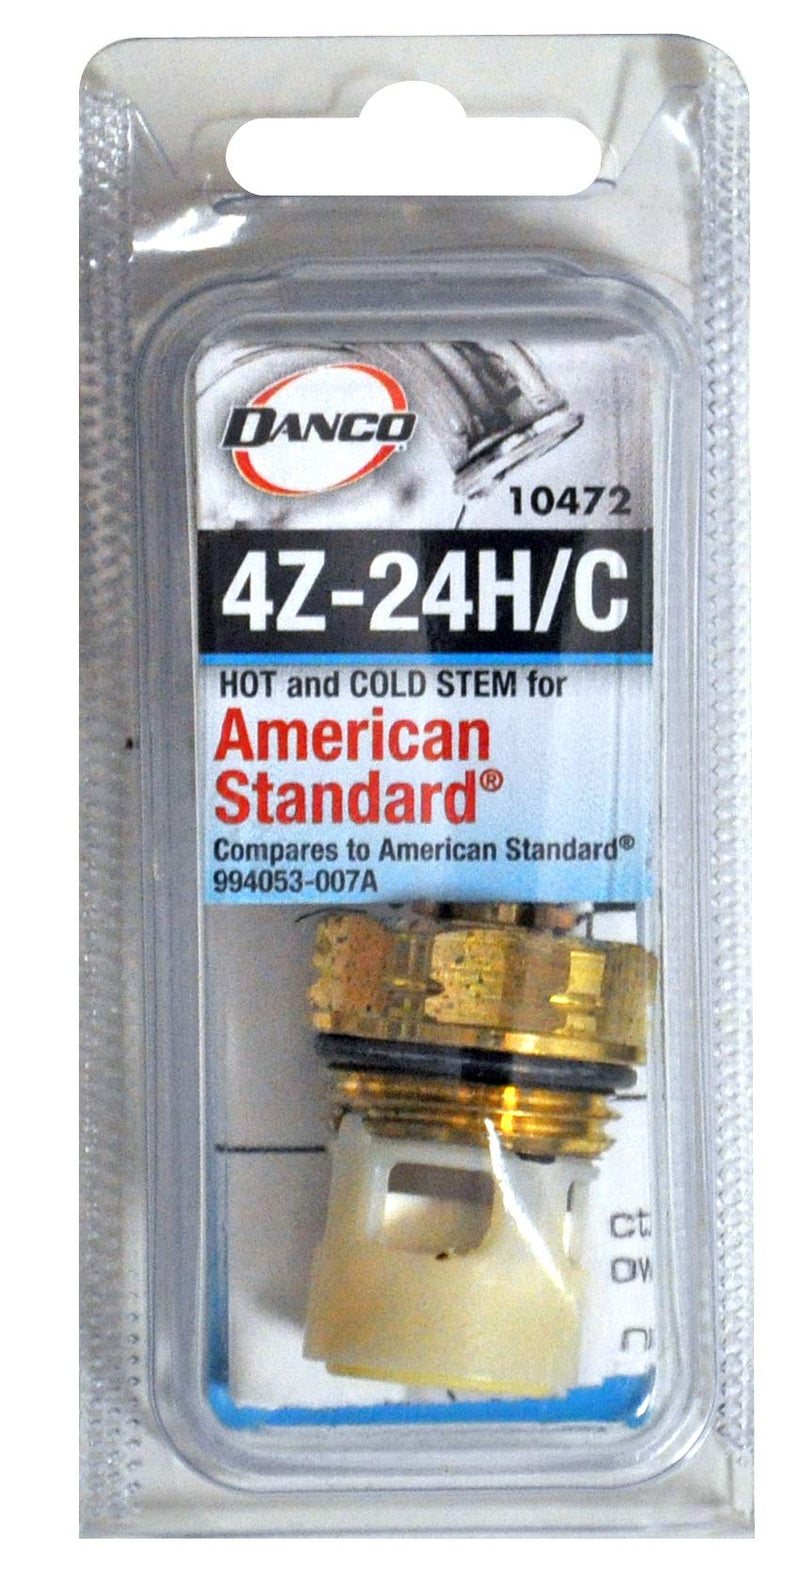 Danco (10472) 4Z-24H Hot and Cold Replacement Stem for American Standard Faucets, 1-Pack, Pack of 1, Brass - NewNest Australia